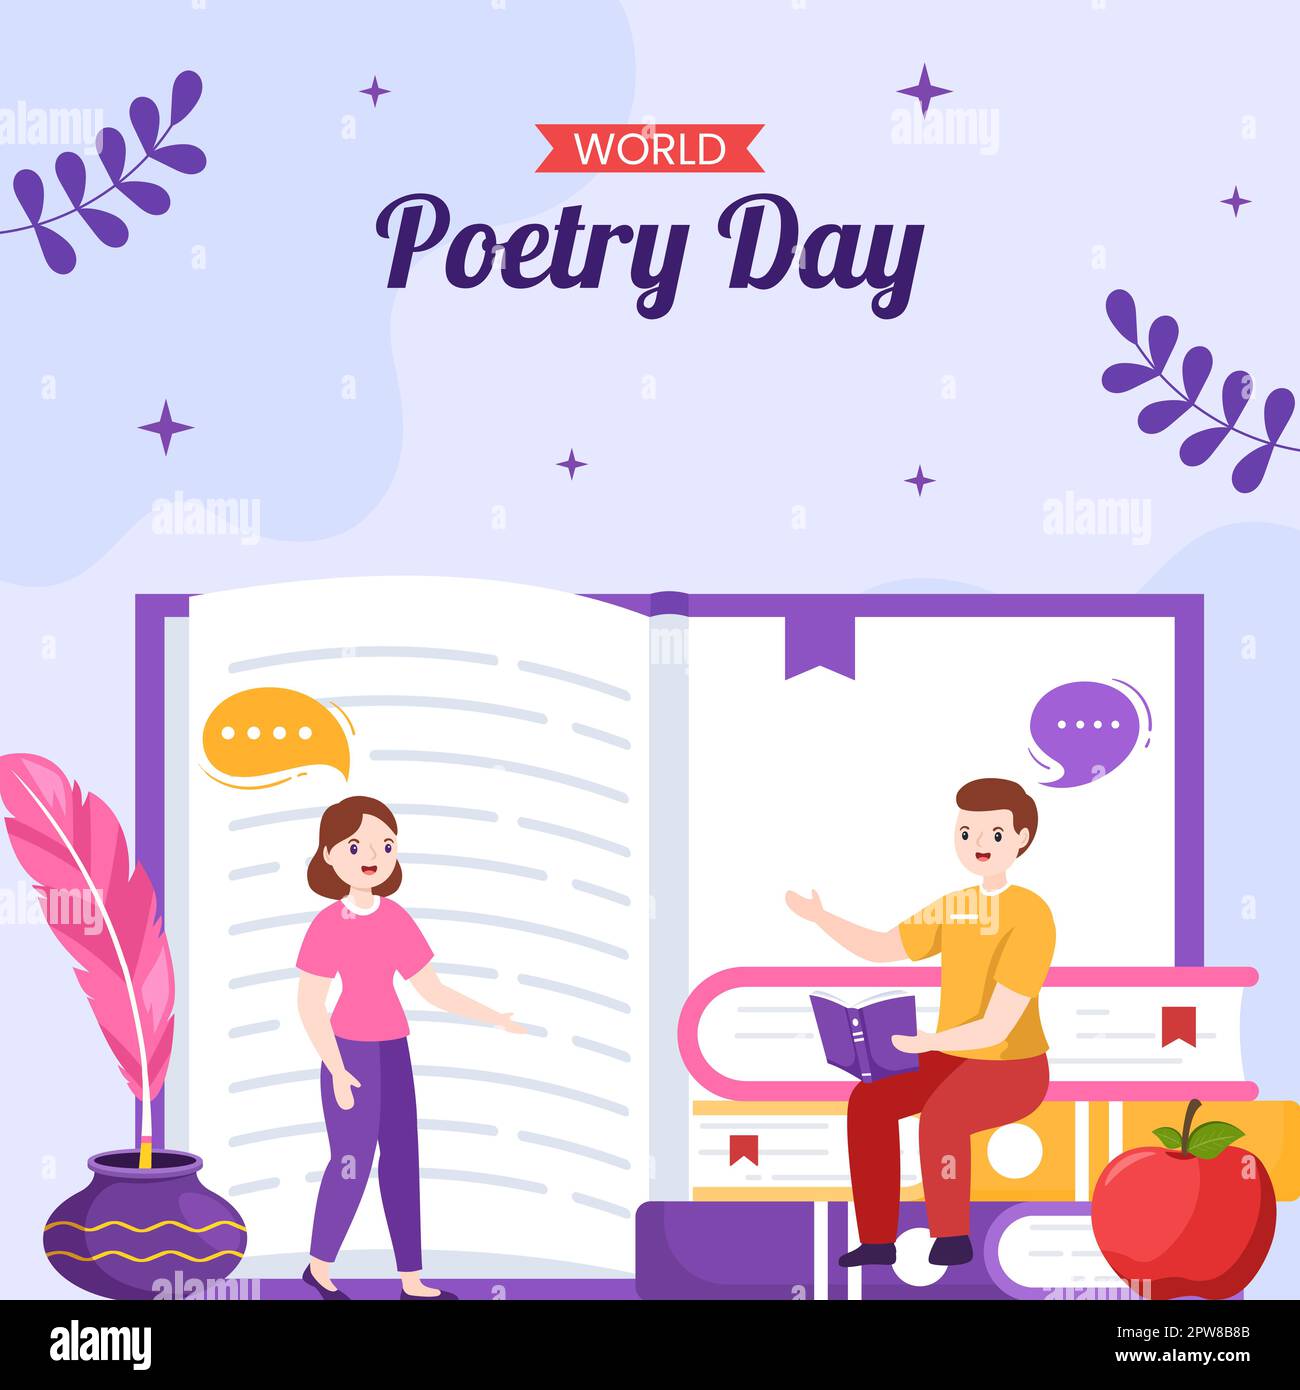 World Poetry Day Social Media Illustration with Paper and Quill Flat Cartoon Hand Drawn Templates Stock Vector